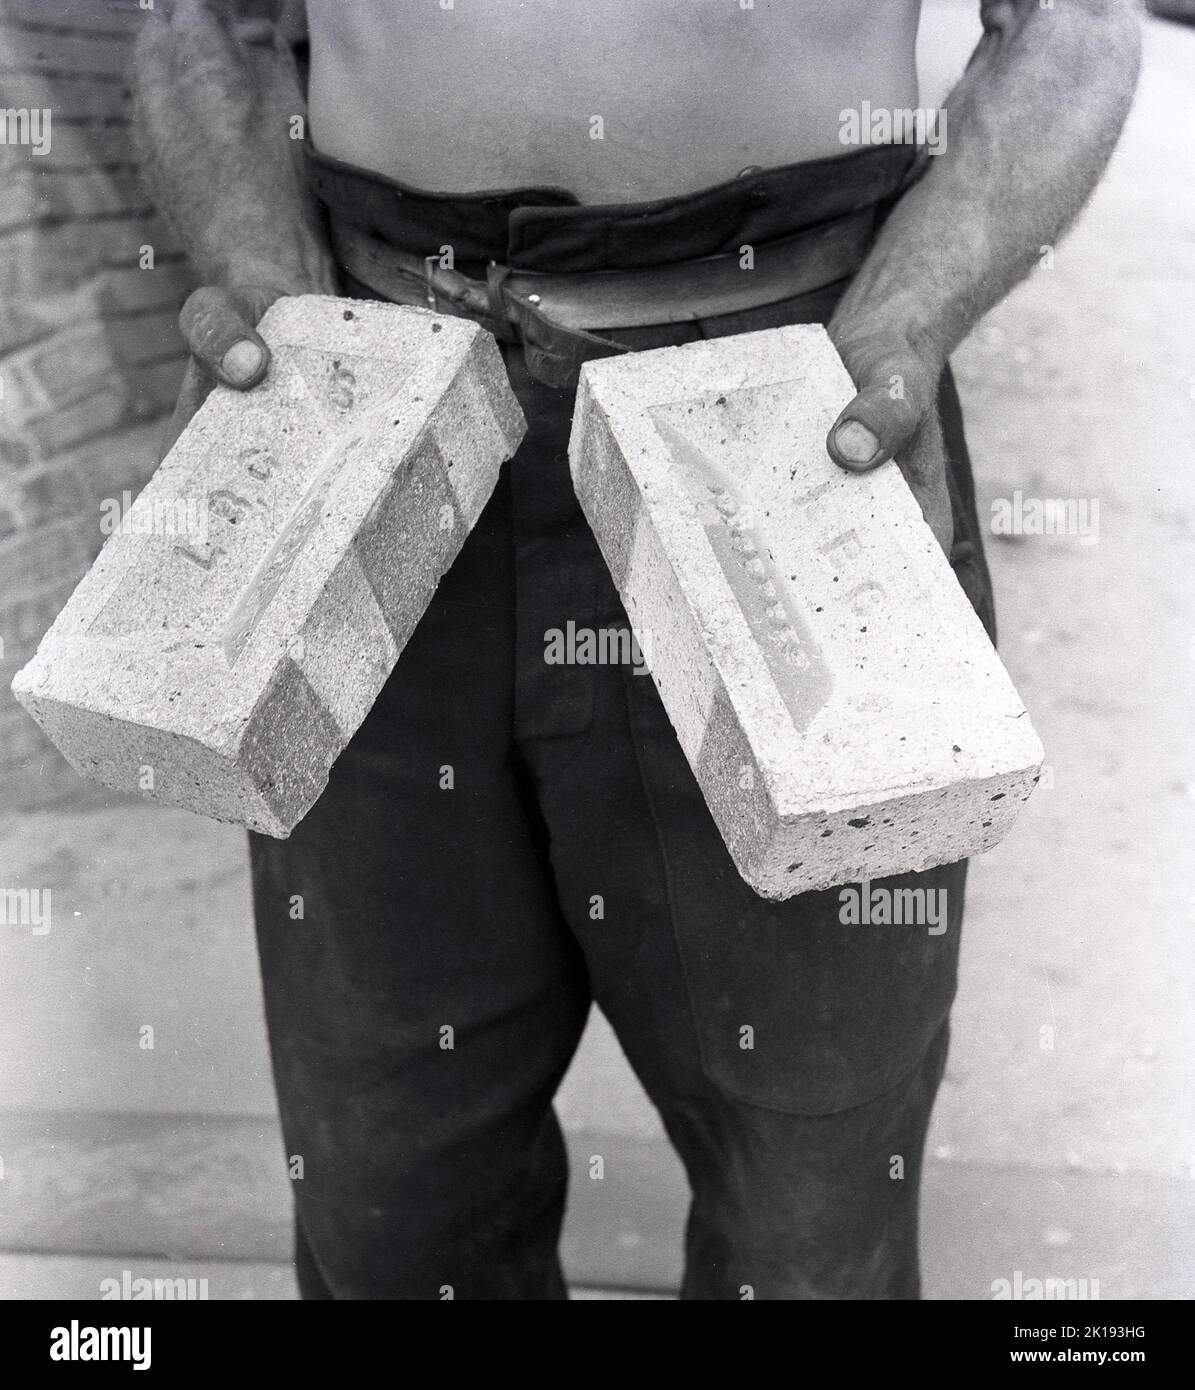 1950s, historical, a male worker holding in his hands two bricks, imprinted with the letters L.B.C, made at the brickworks of the London Brick Company, Stewartby, Bedfordshire, England, UK.  Founded in 1900, the London Brick Company specialised in making 'fletton' bricks, a name given generally to bricks made from Lower Oxford Clay, which has the benefit of containing carbon, providing part of the fuel required in firing. Stock Photo